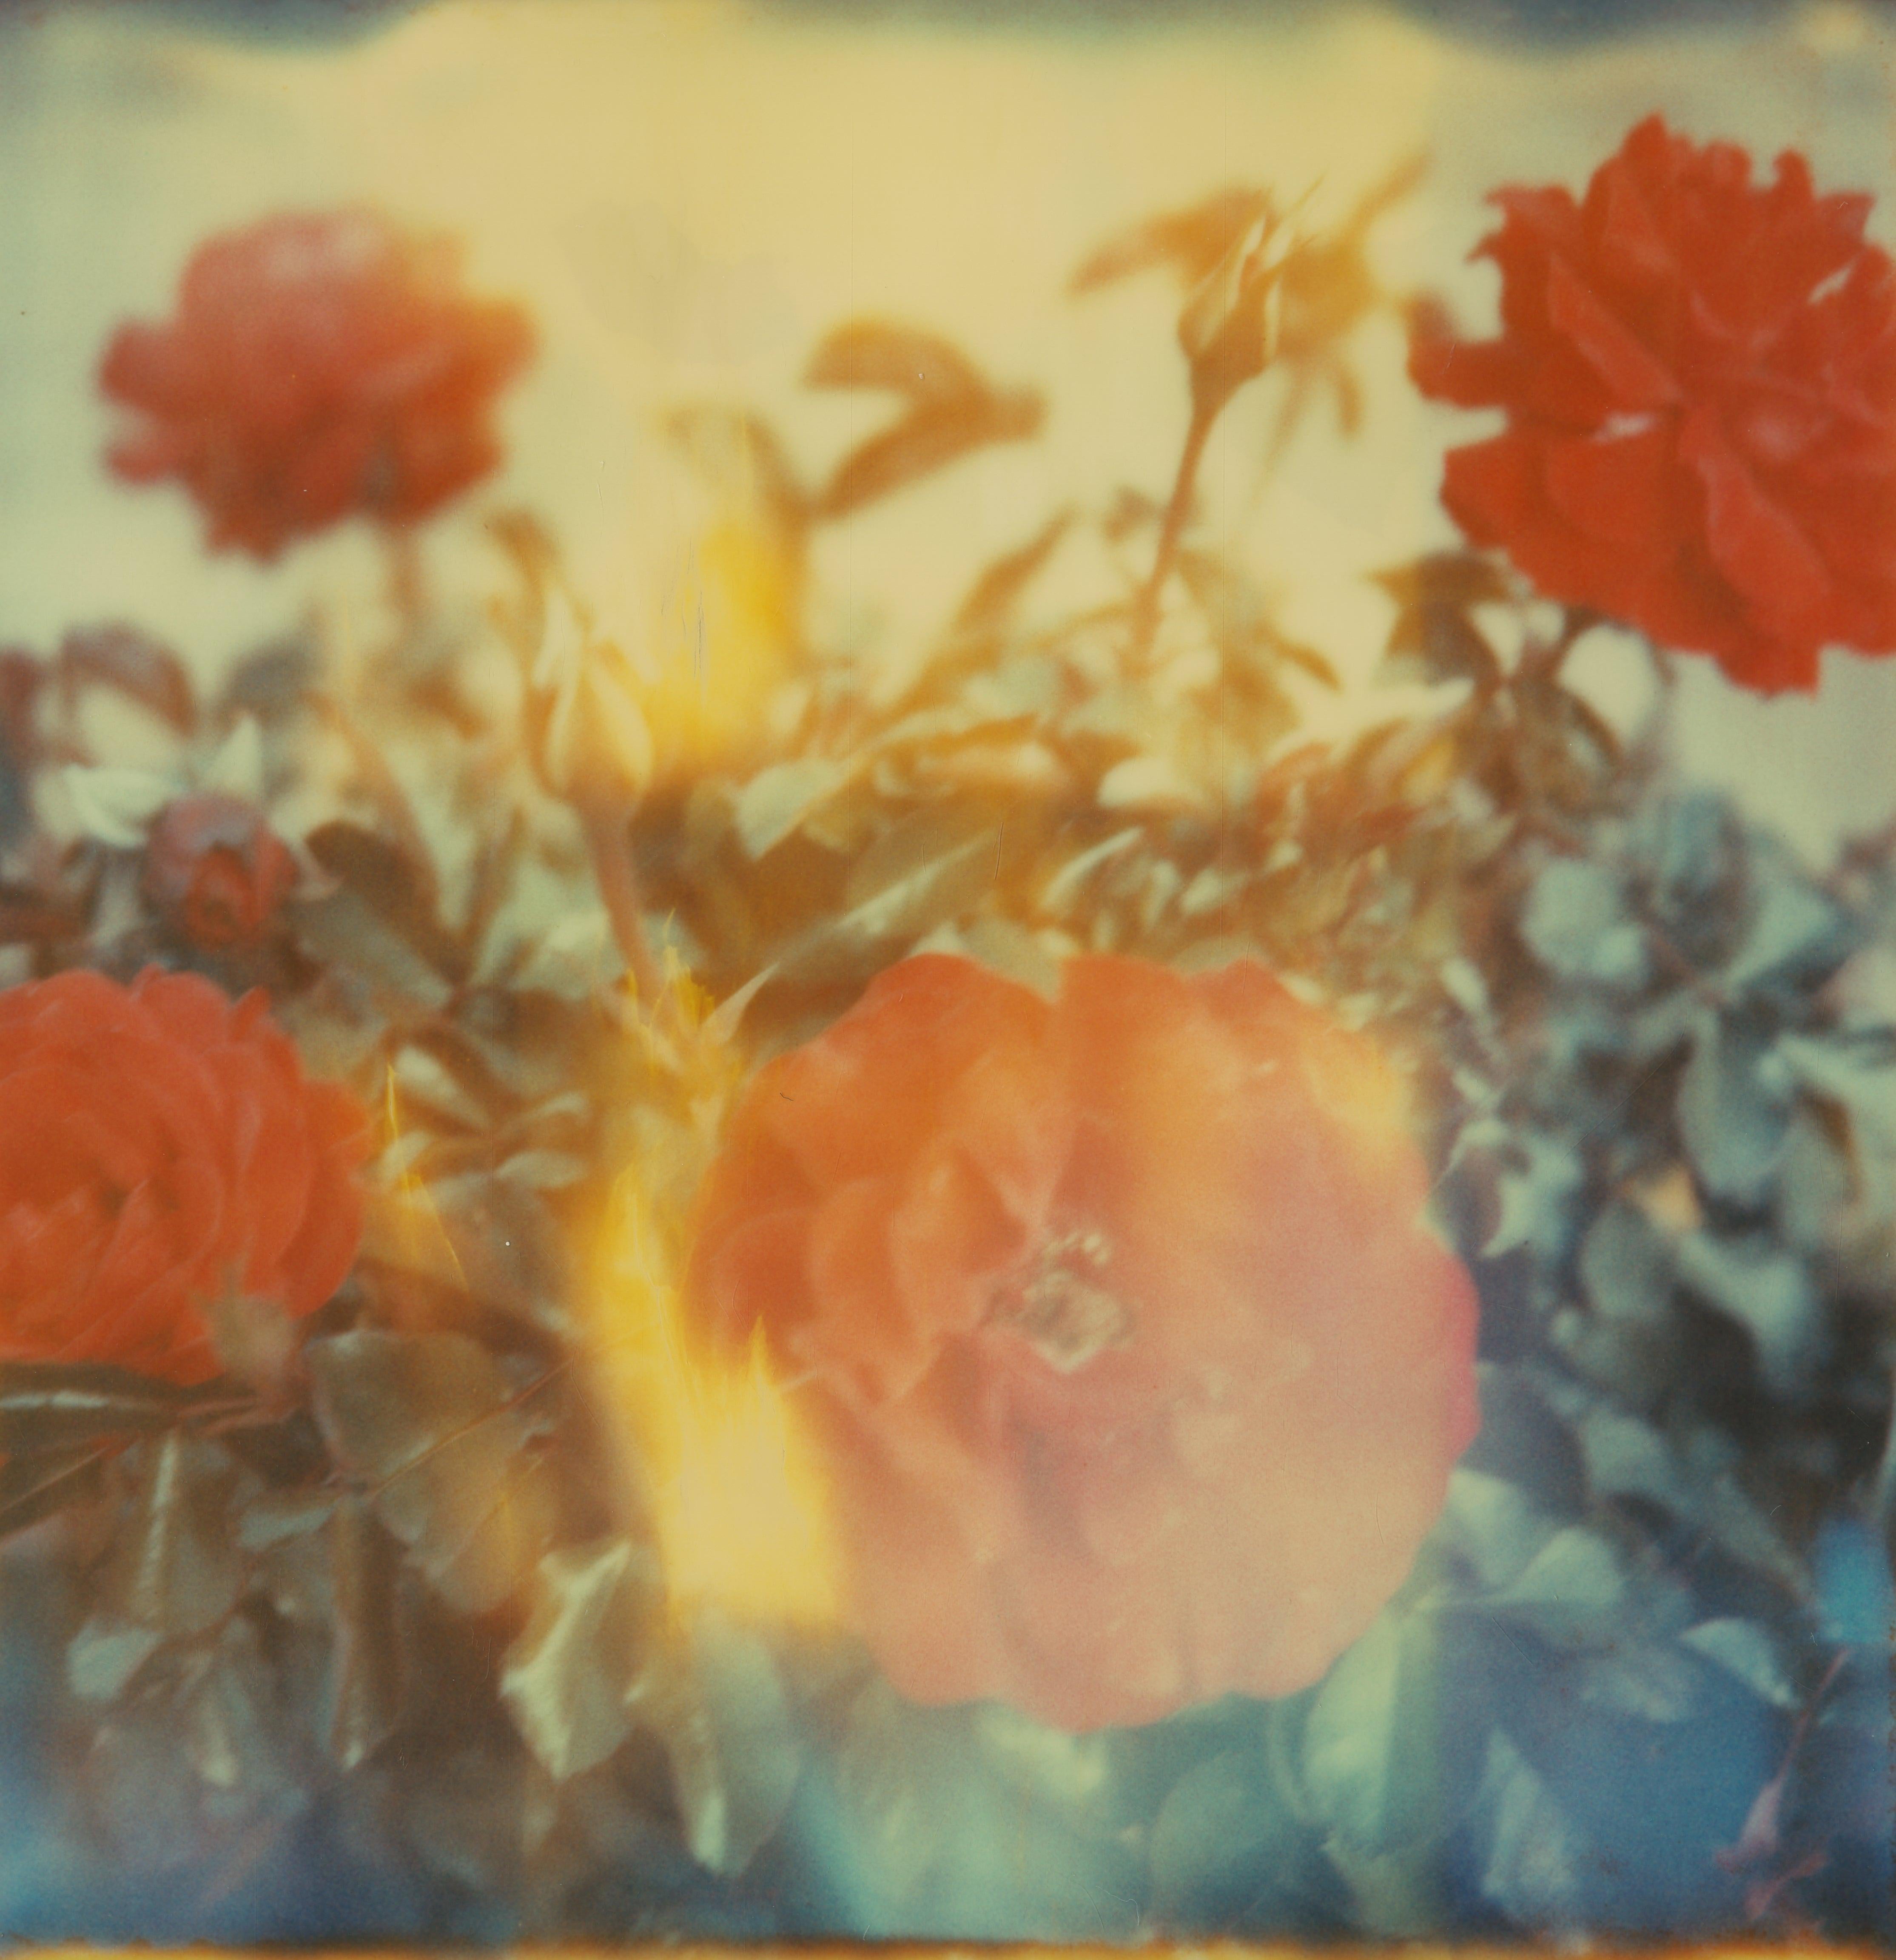 One Day I'll leave (The Girl behind the White Picket Fence) diptych - Polaroid - Photograph by Stefanie Schneider